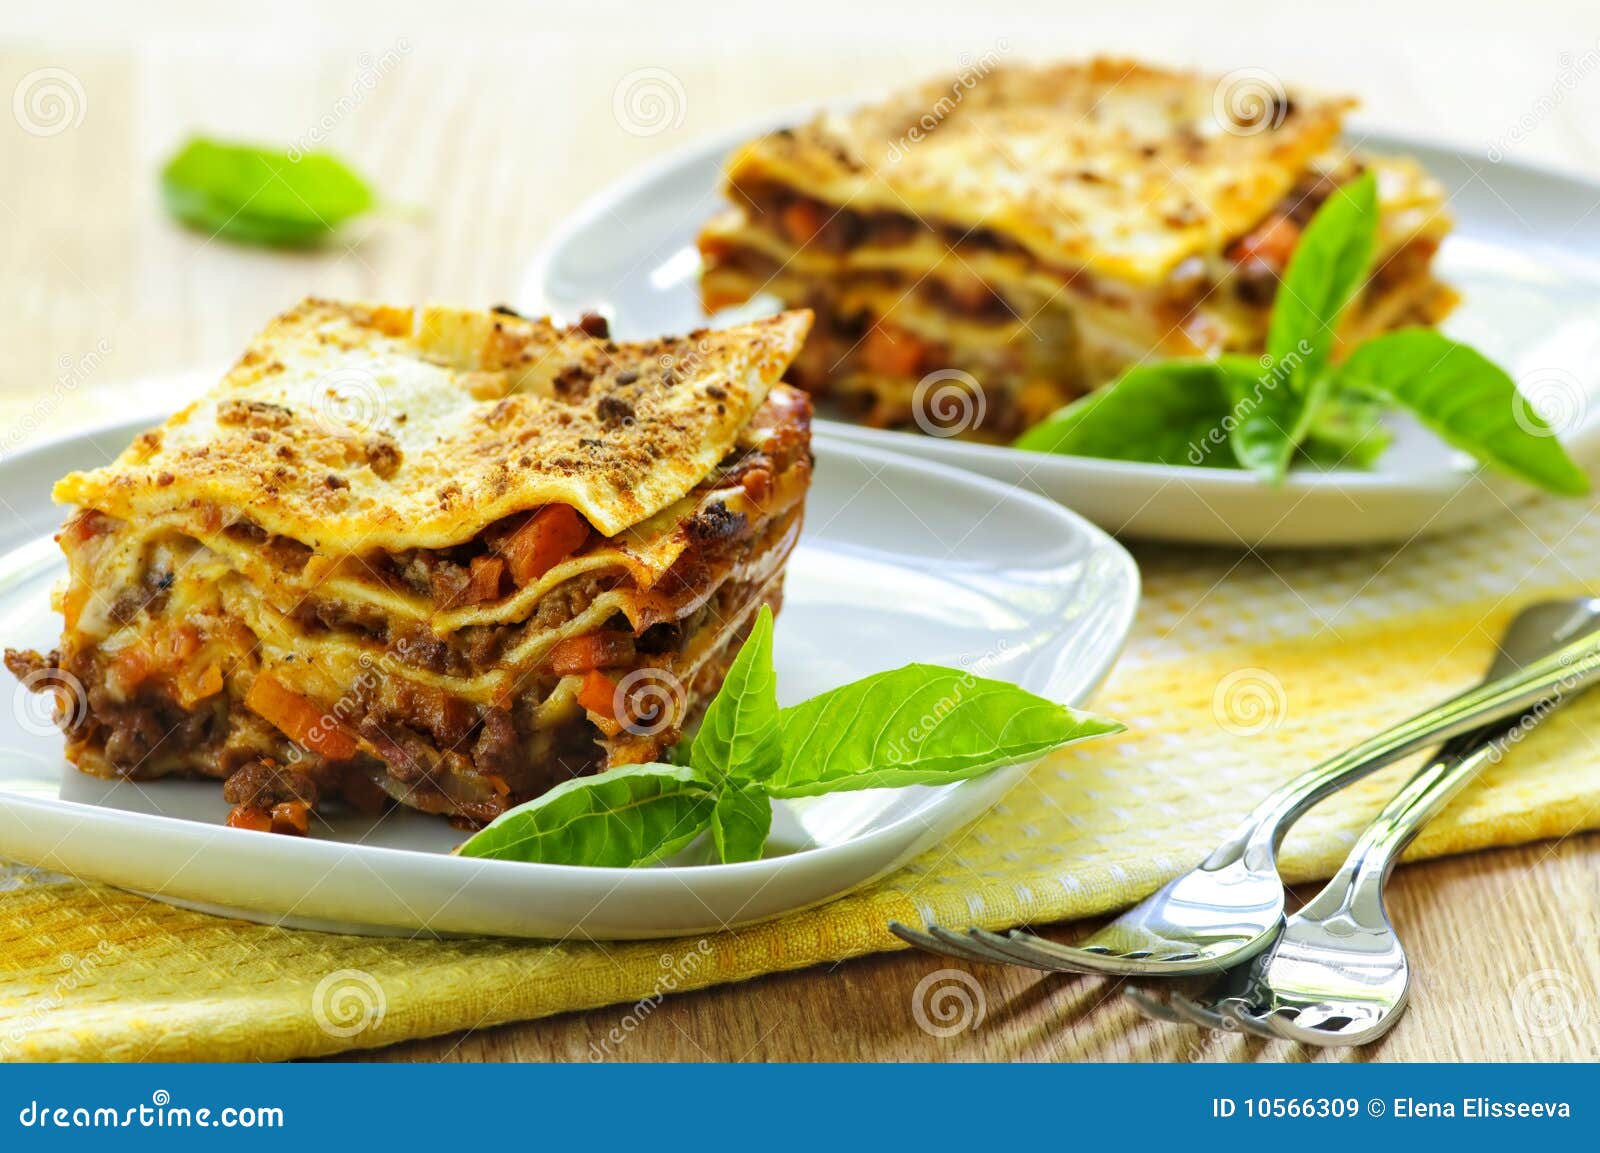 Plates of lasagna stock image. Image of lunch, healthy - 10566309